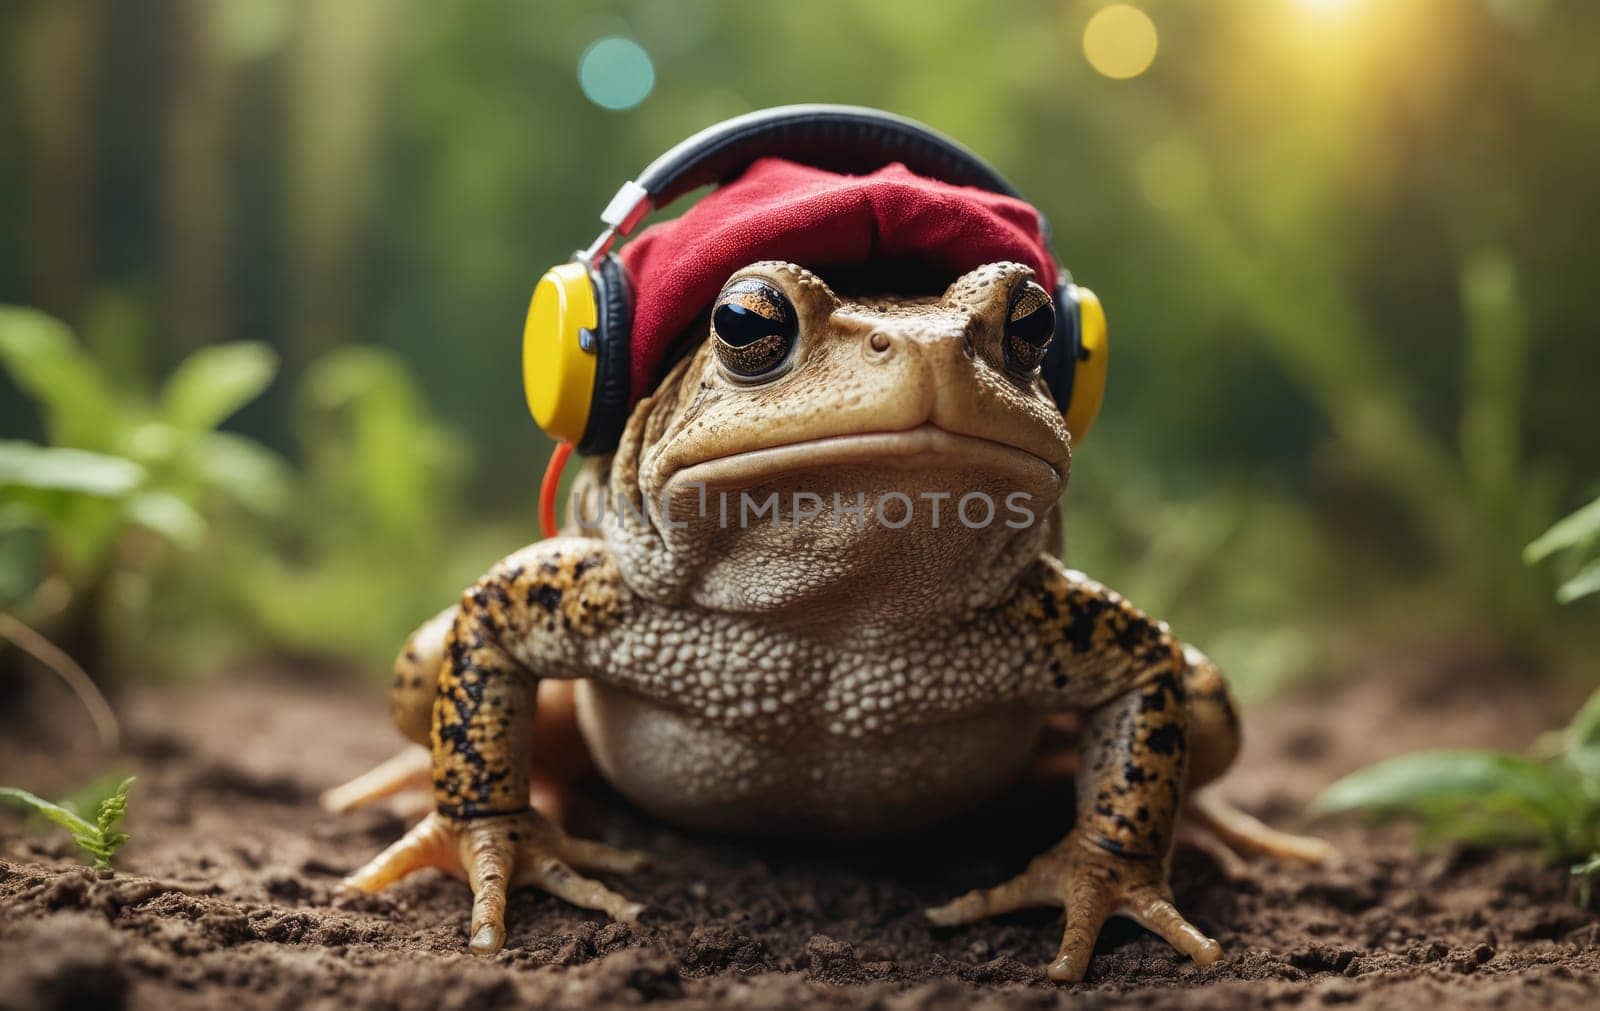 Amphibian frog with headphones and hat sitting on ground by Andre1ns